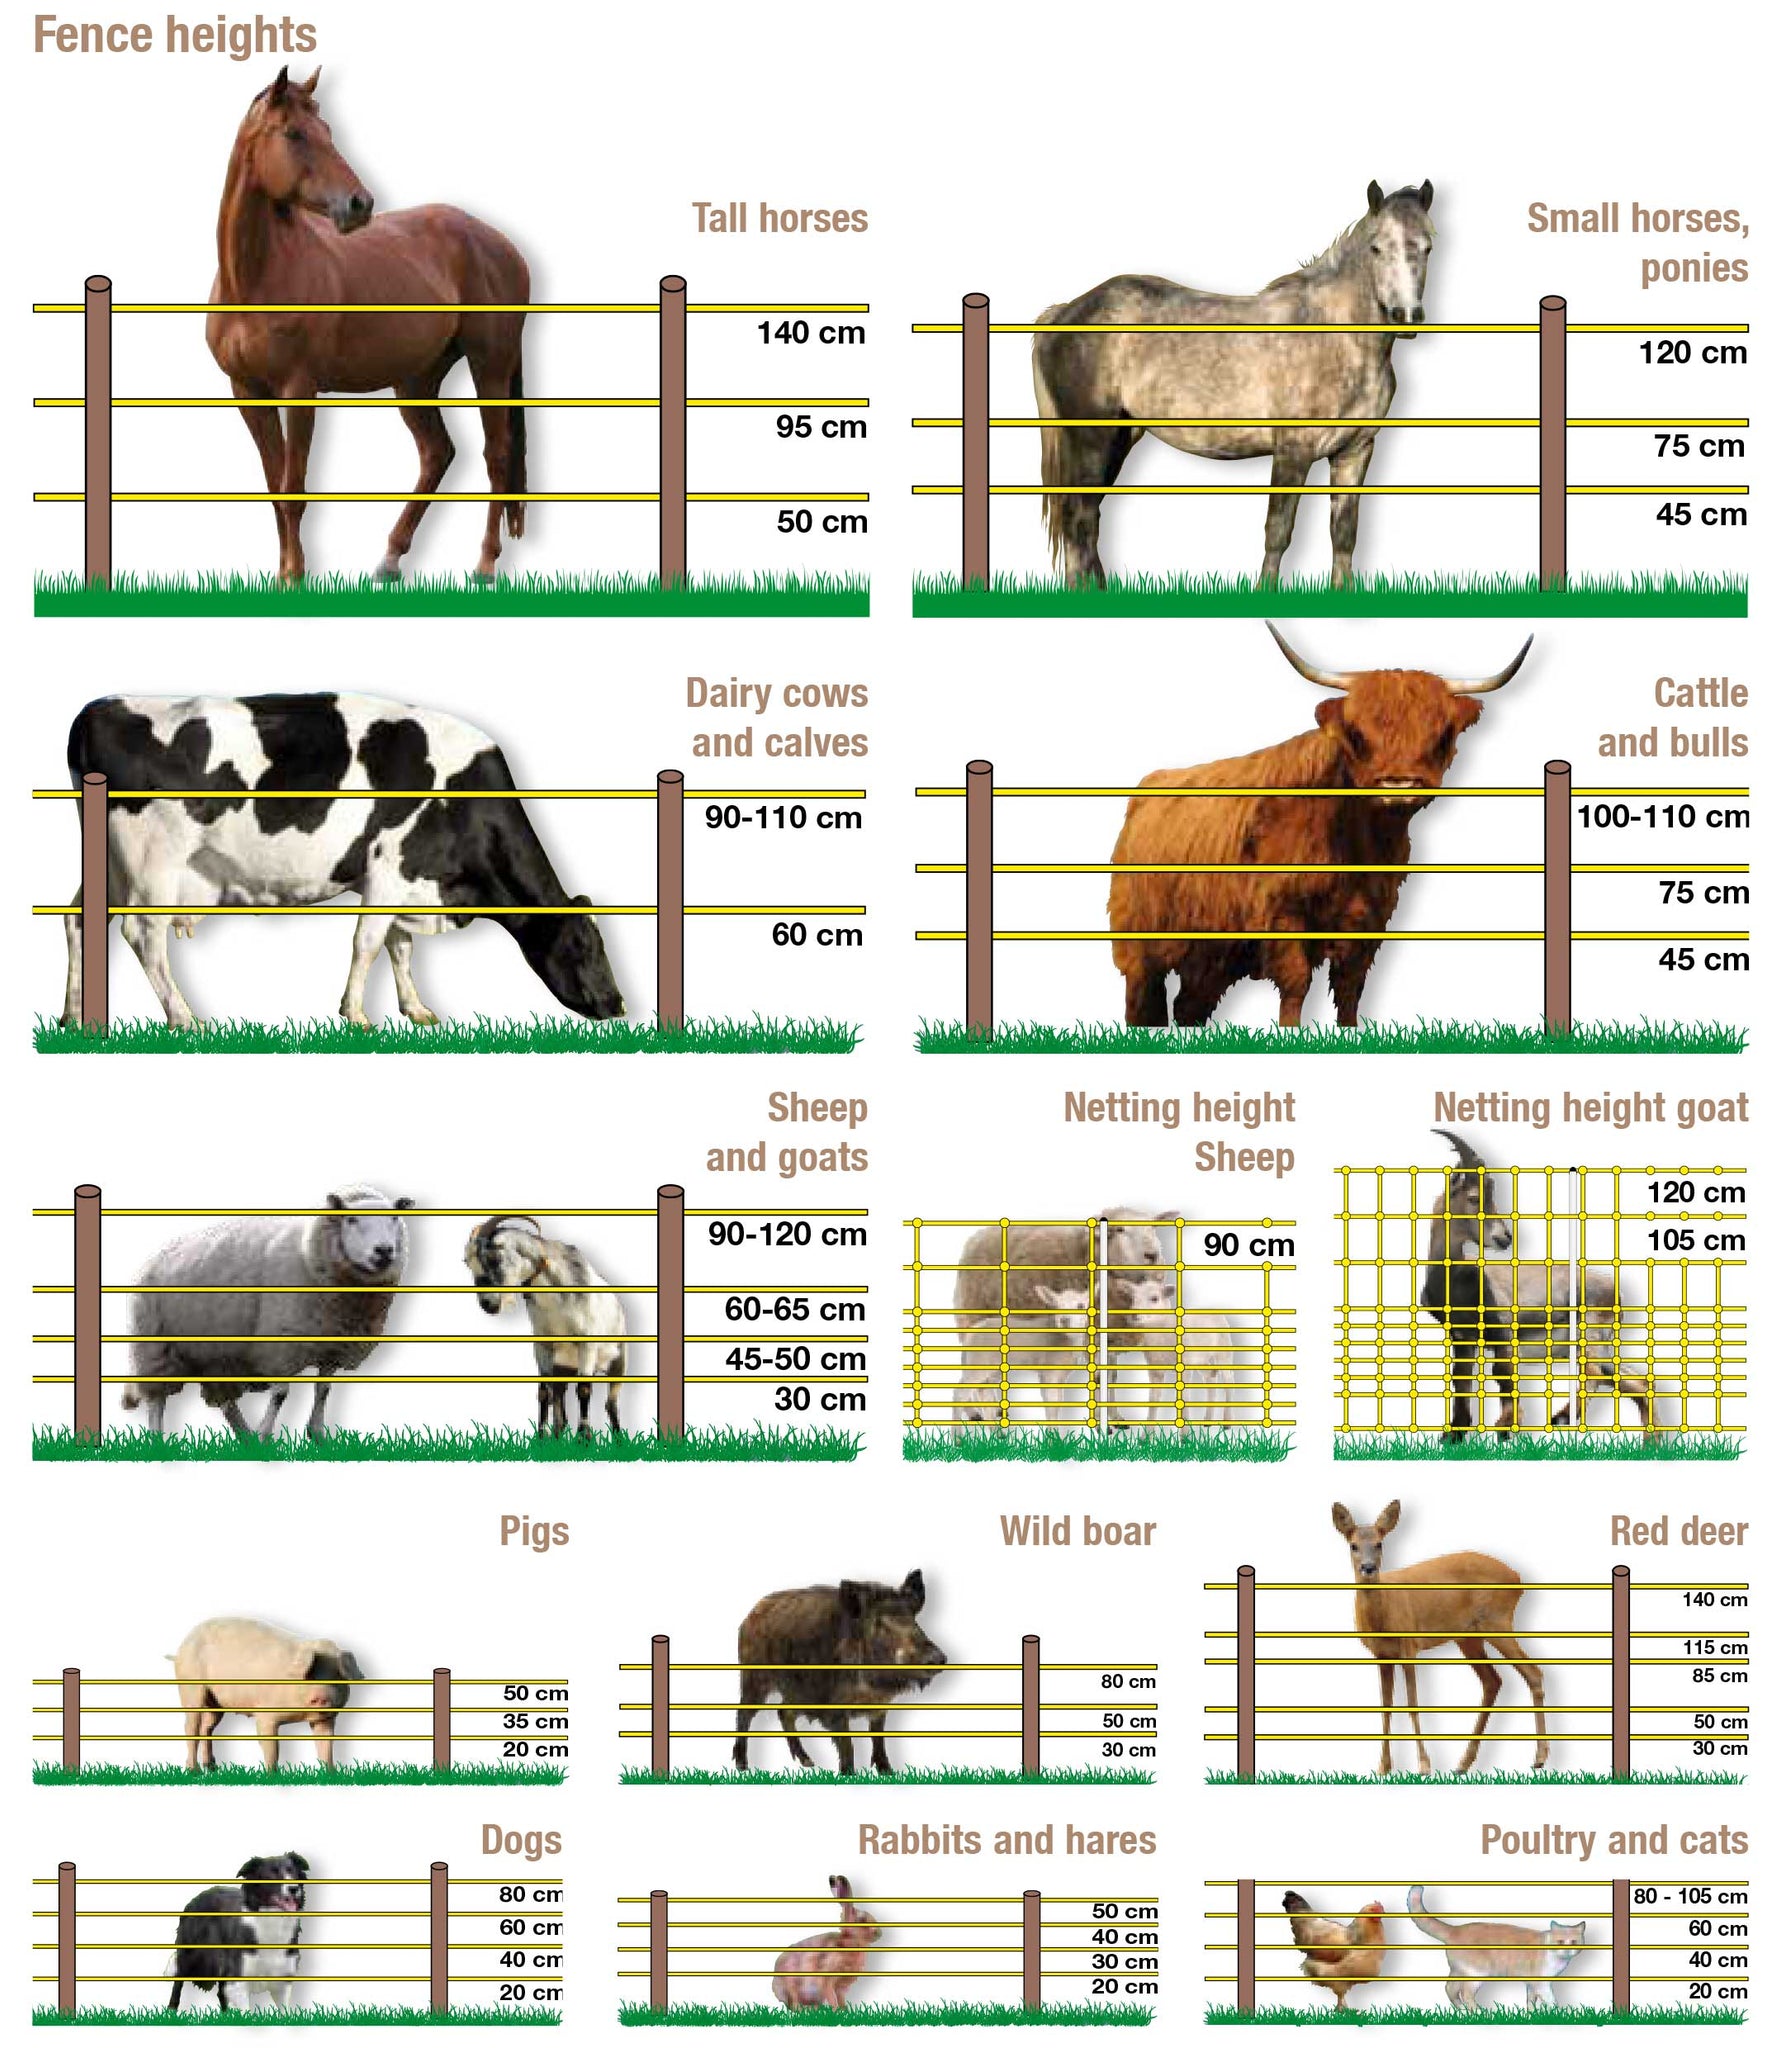 Electric Fence Heights For Each Animal Type